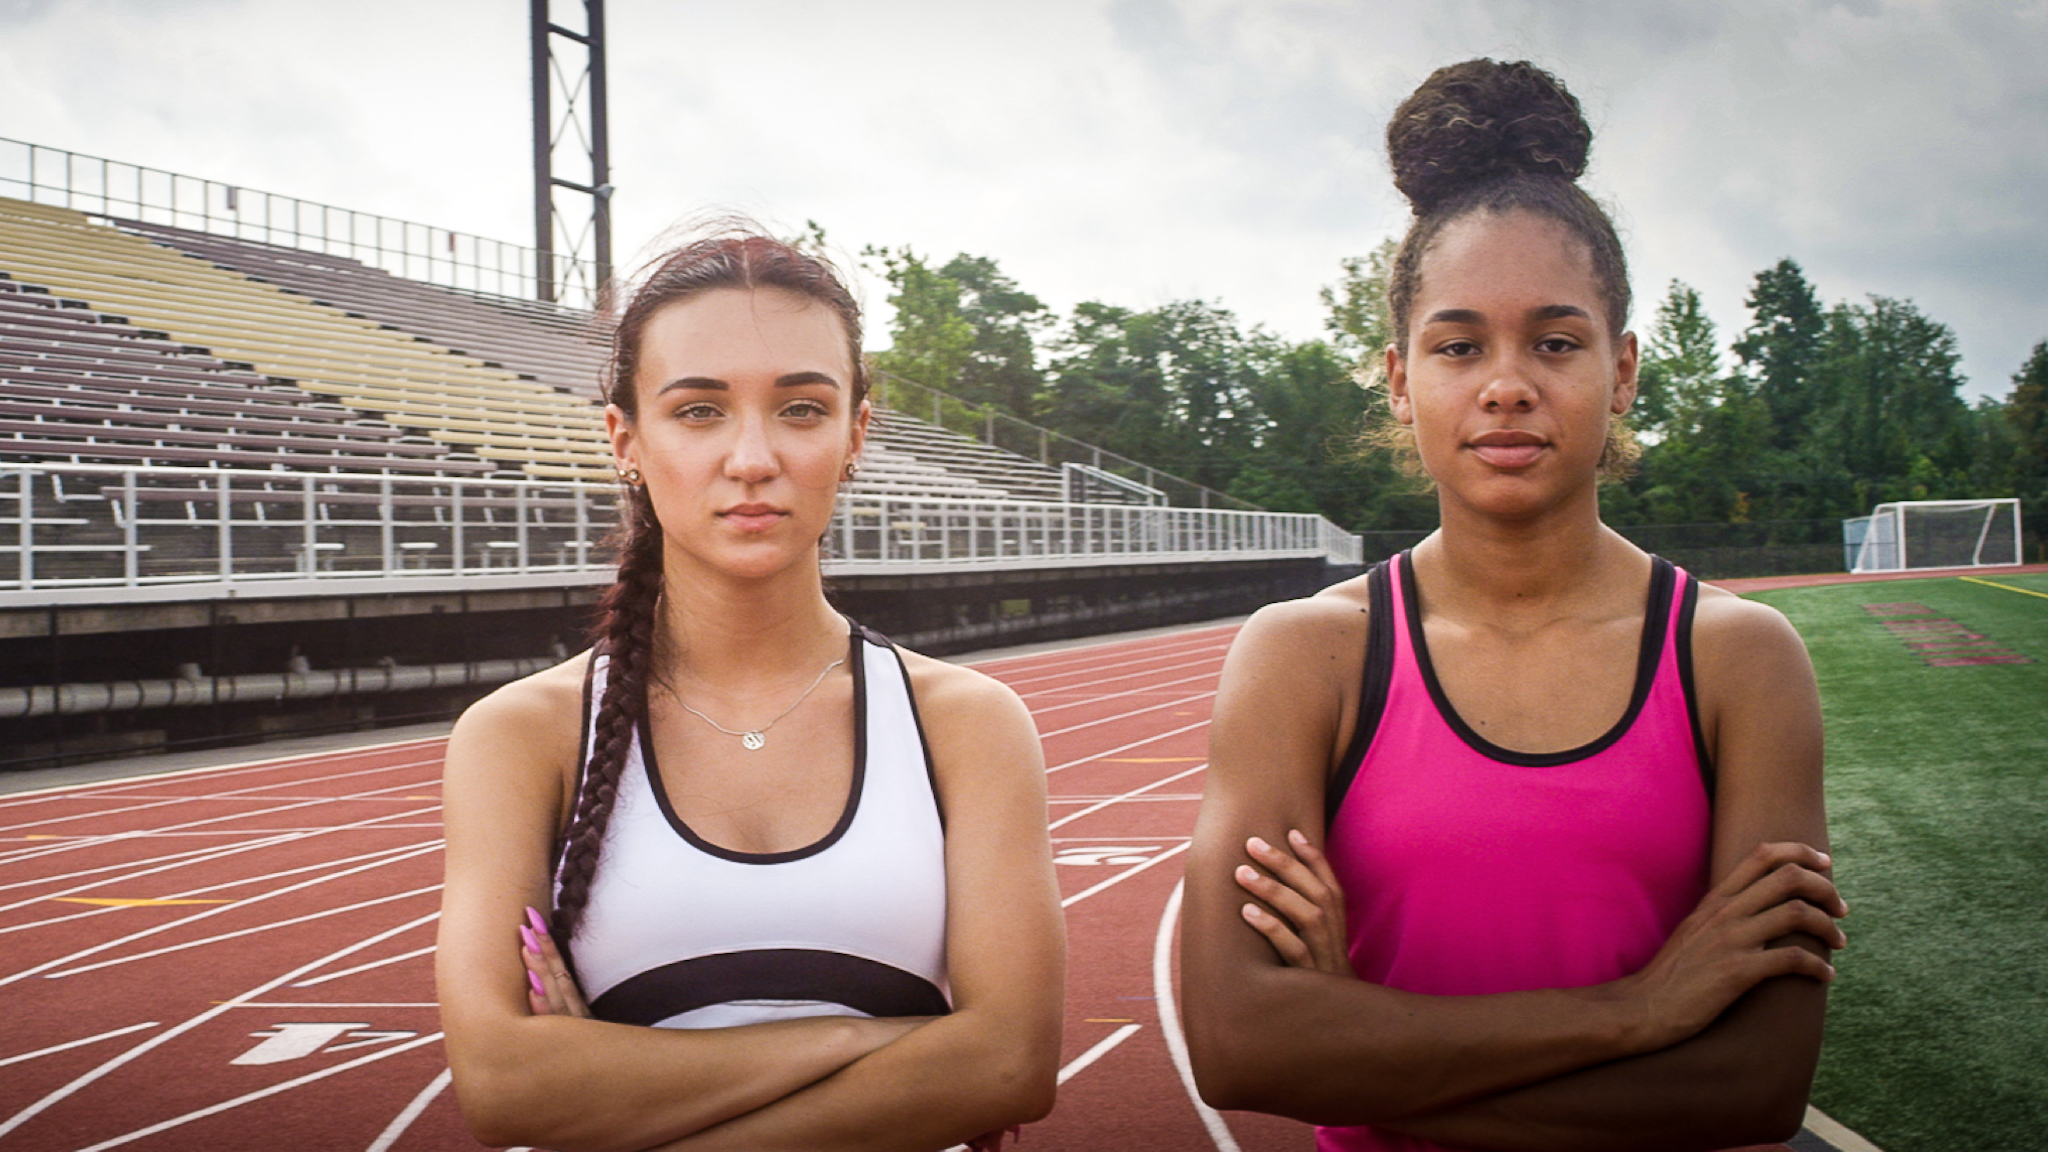 High-school athletes Selina Soule (left) and Alanna Smith (right), who compete within the Connecticut Interscholastic Athletic Conference.